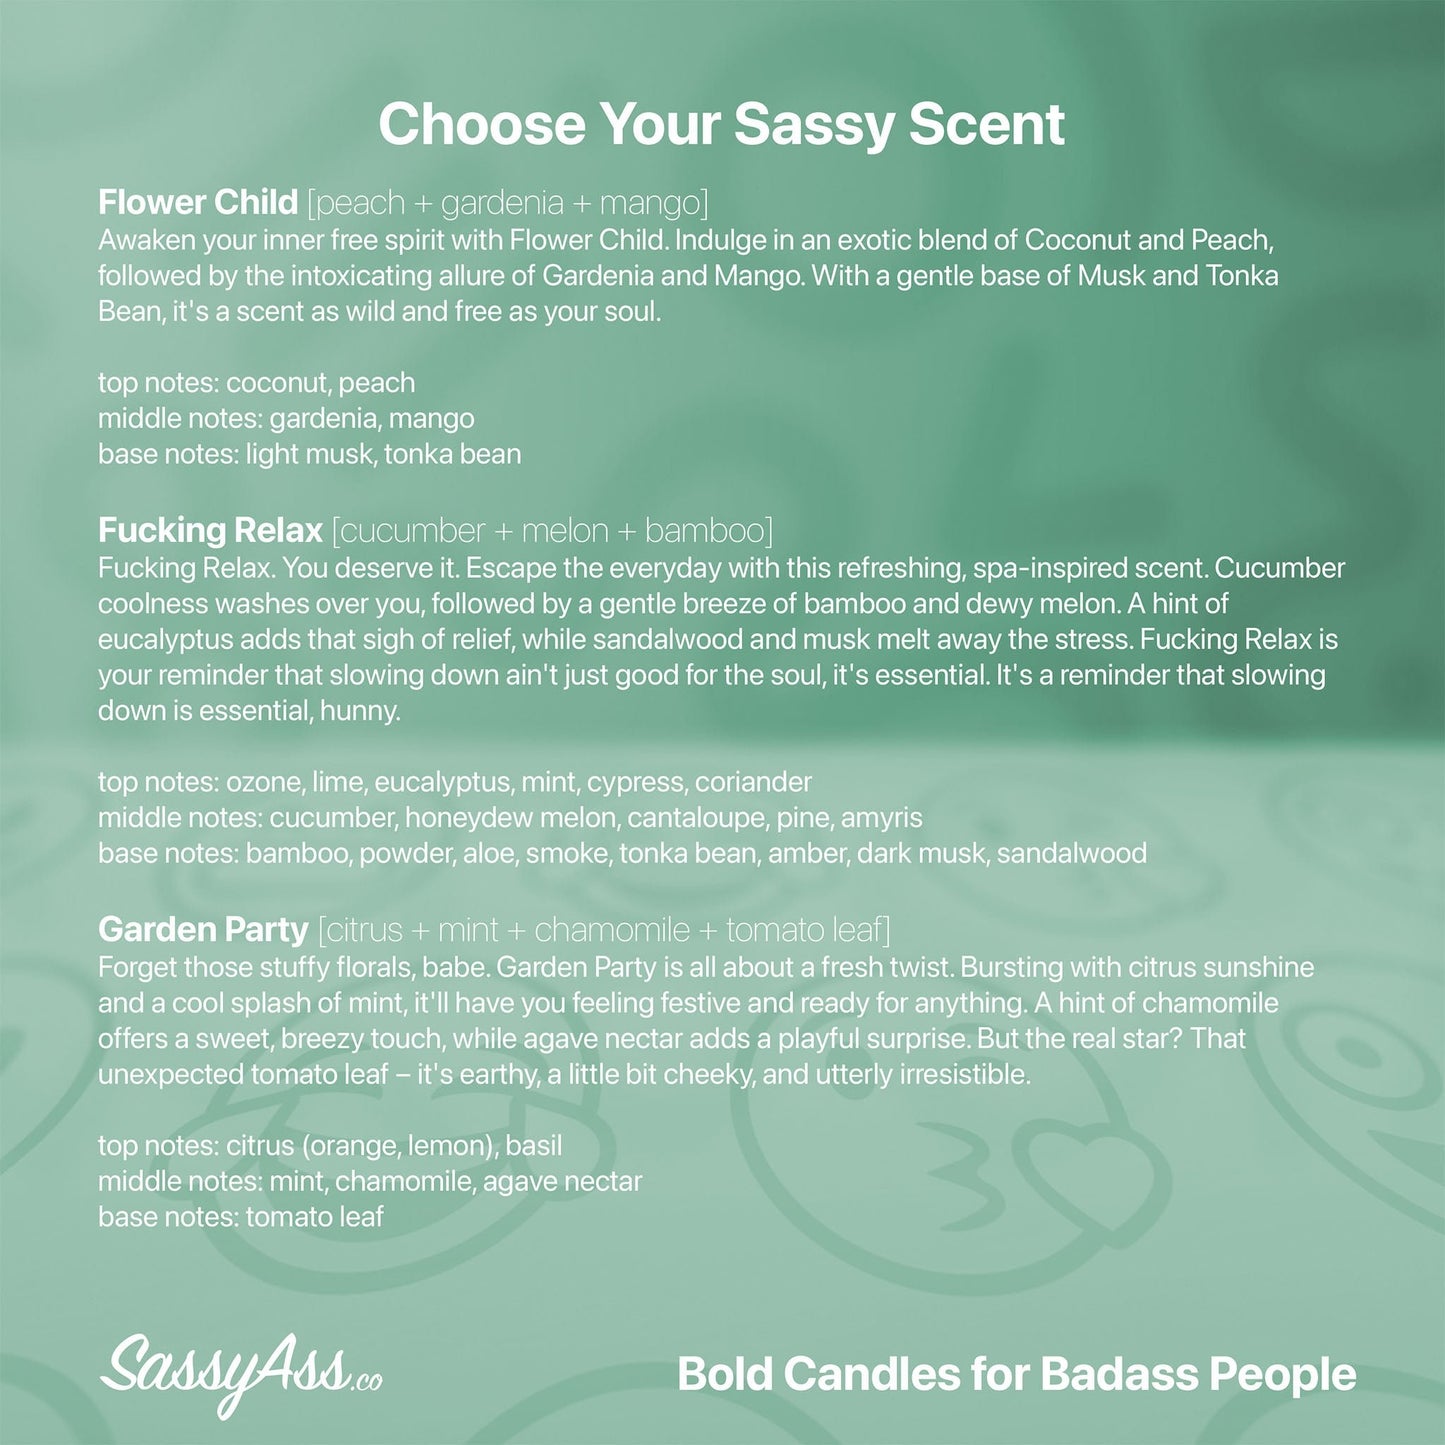 Custom Collaboration Candle - Personalized Sassy Saying, Scented or Unscented Soy Candle, Unique Present, Co-Branded, Essential Oil Infused, - the back cover of the book choose your sassy scent - SassyAss.co